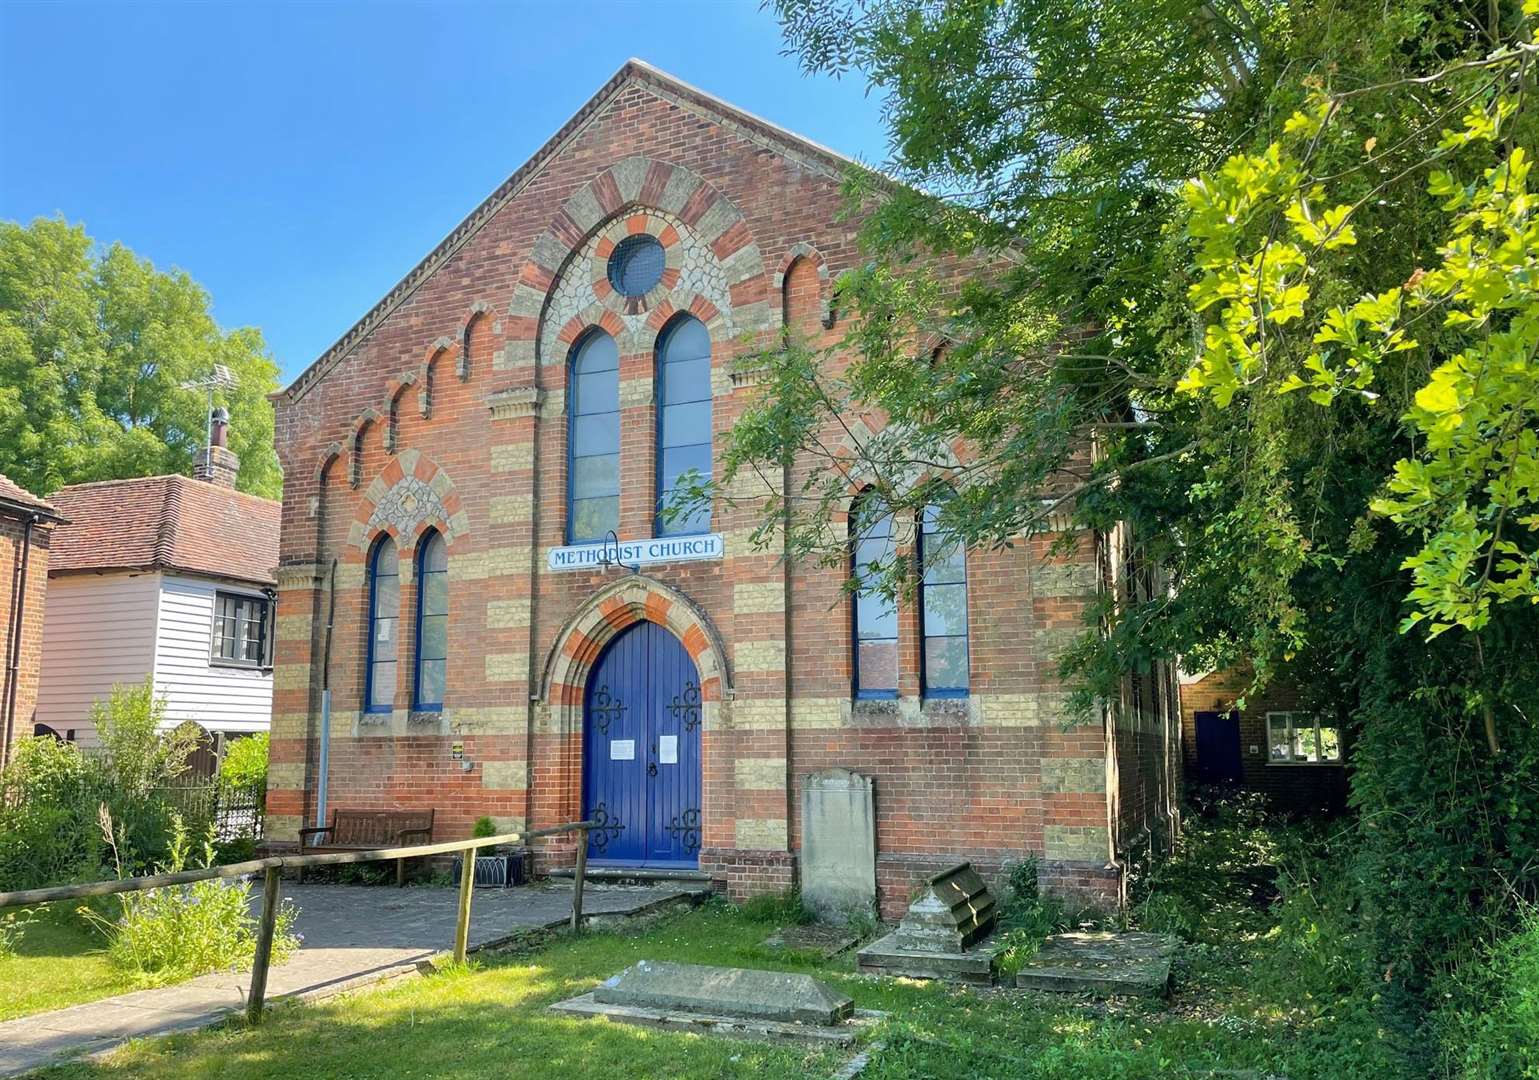 The former Methodist Church in Headcorn has also been bought by its parish council after being put up for auction. Picture: Clive Emson